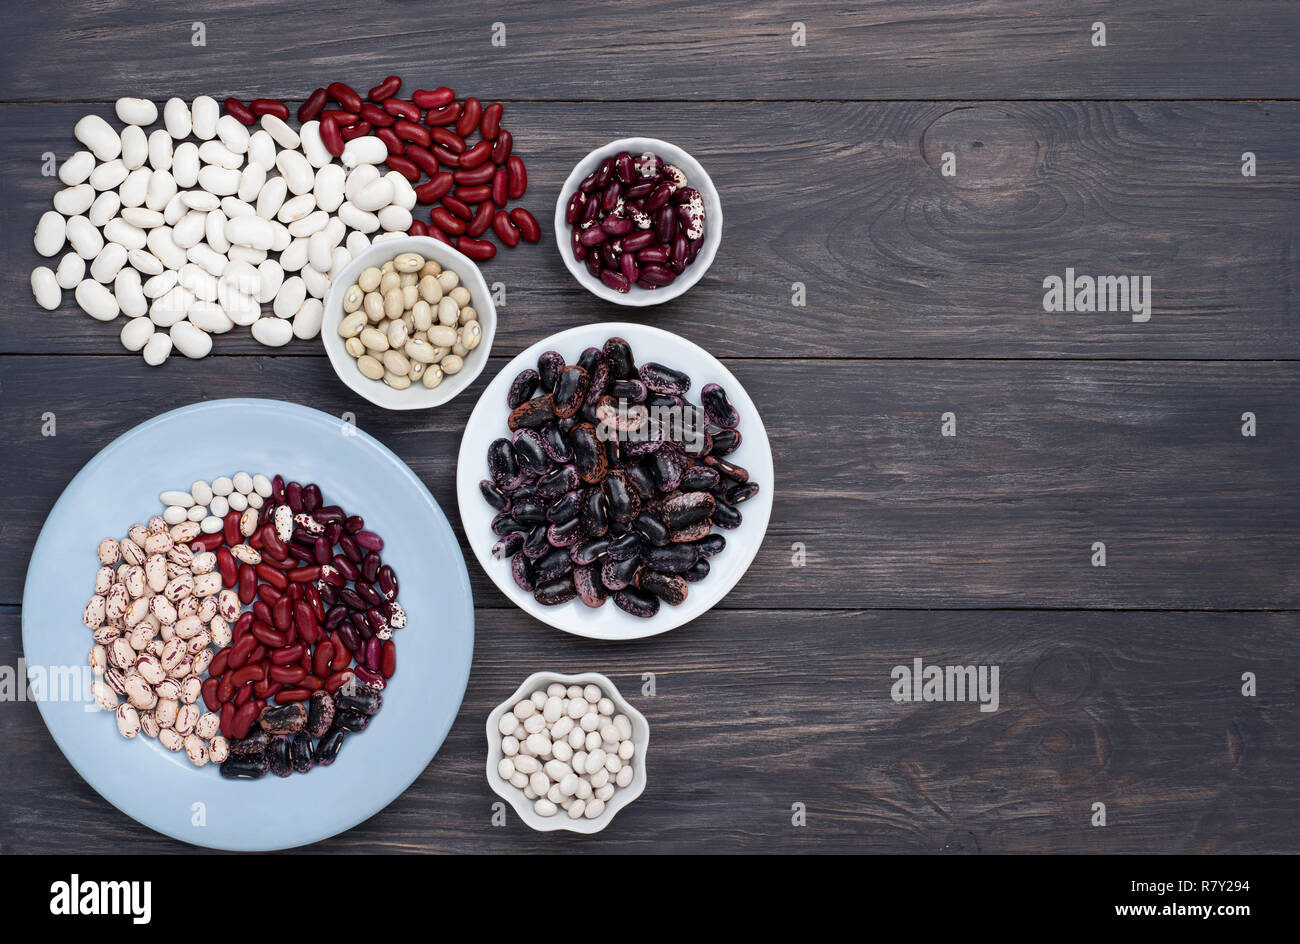 Various dry beans on a wooden background in two bowls and scattered  on the table. Red kidney,pinto, navy  and other  beans. Stock Photo